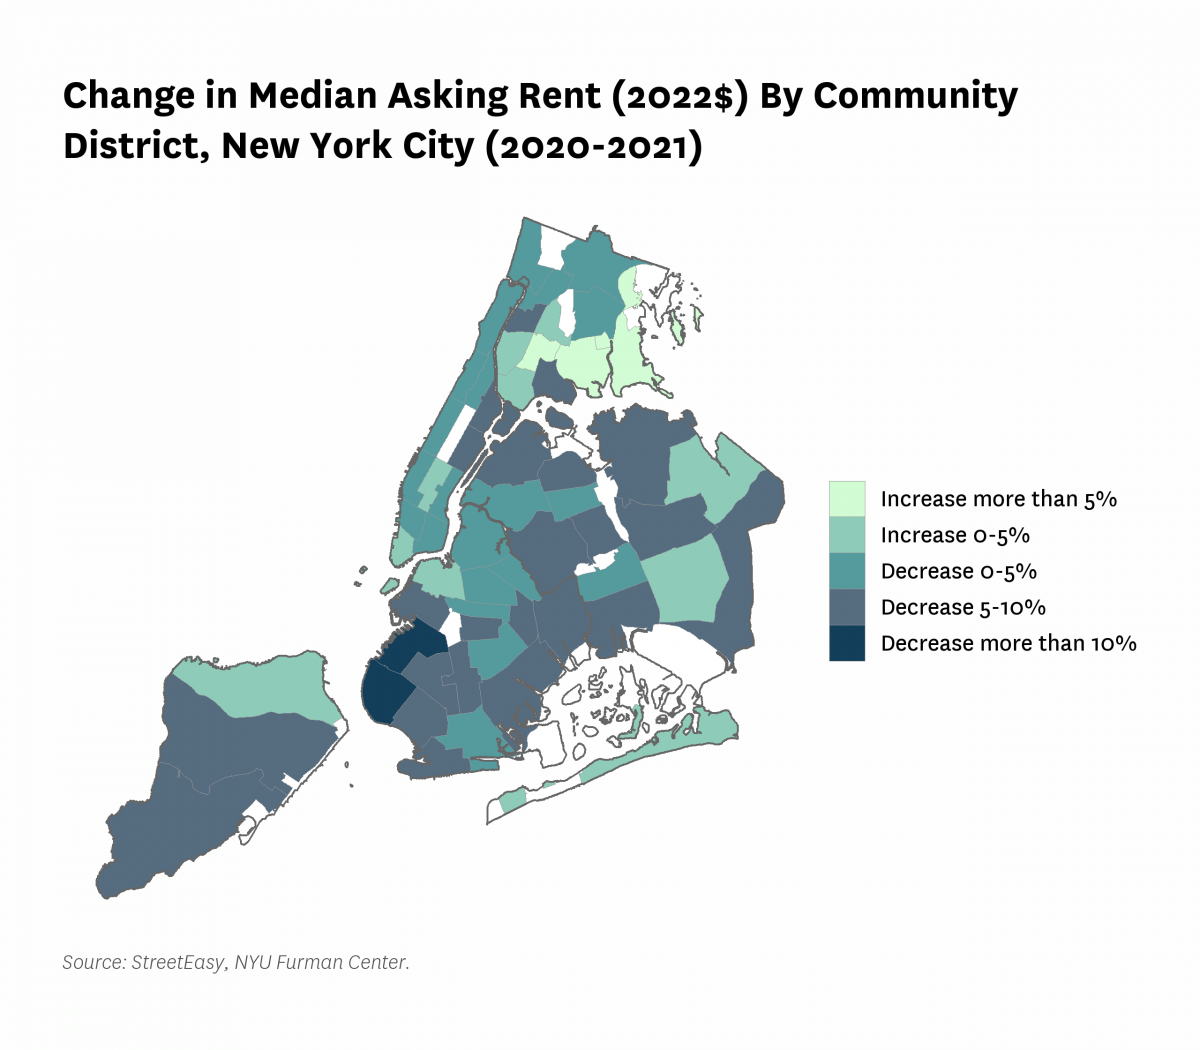 Map showing the change in median asking rent by community district in New York City from 2021 to 2022.